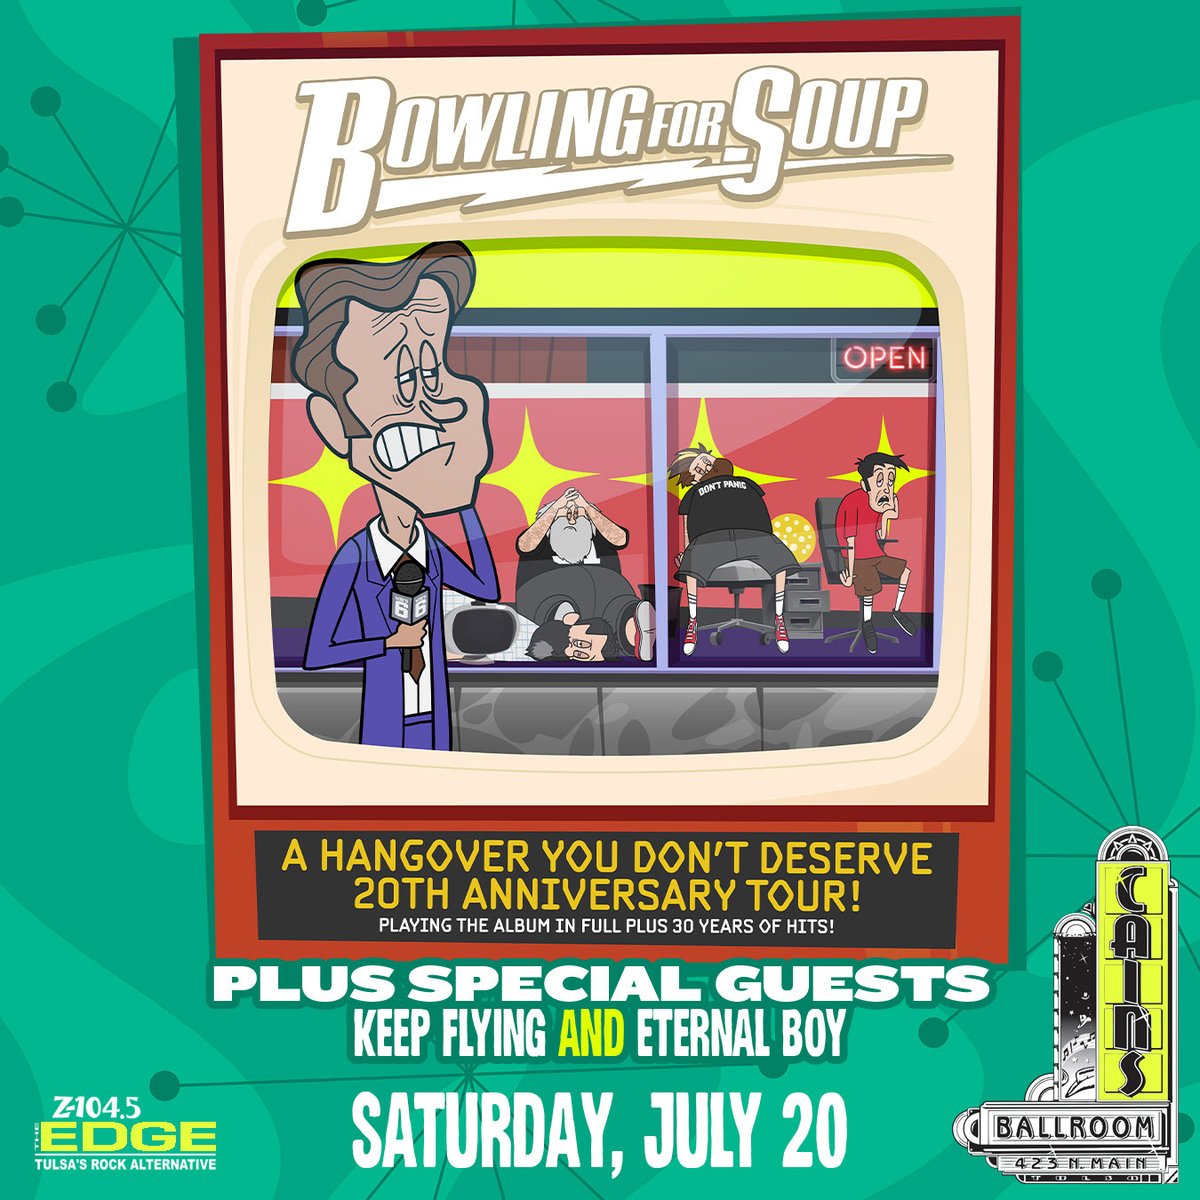 🎶 Don't miss out on an unforgettable night with Bowling For Soup at @CainsBallroom on July 20th, presented by The Edge! 🤩 Secure your tickets now before they're gone! 🎟️🔥 #BowlingForSoup #LiveMusic #TheEdge #CainsBallroom #GetYourTicketsNow edgetulsa.com/concerts-and-e…